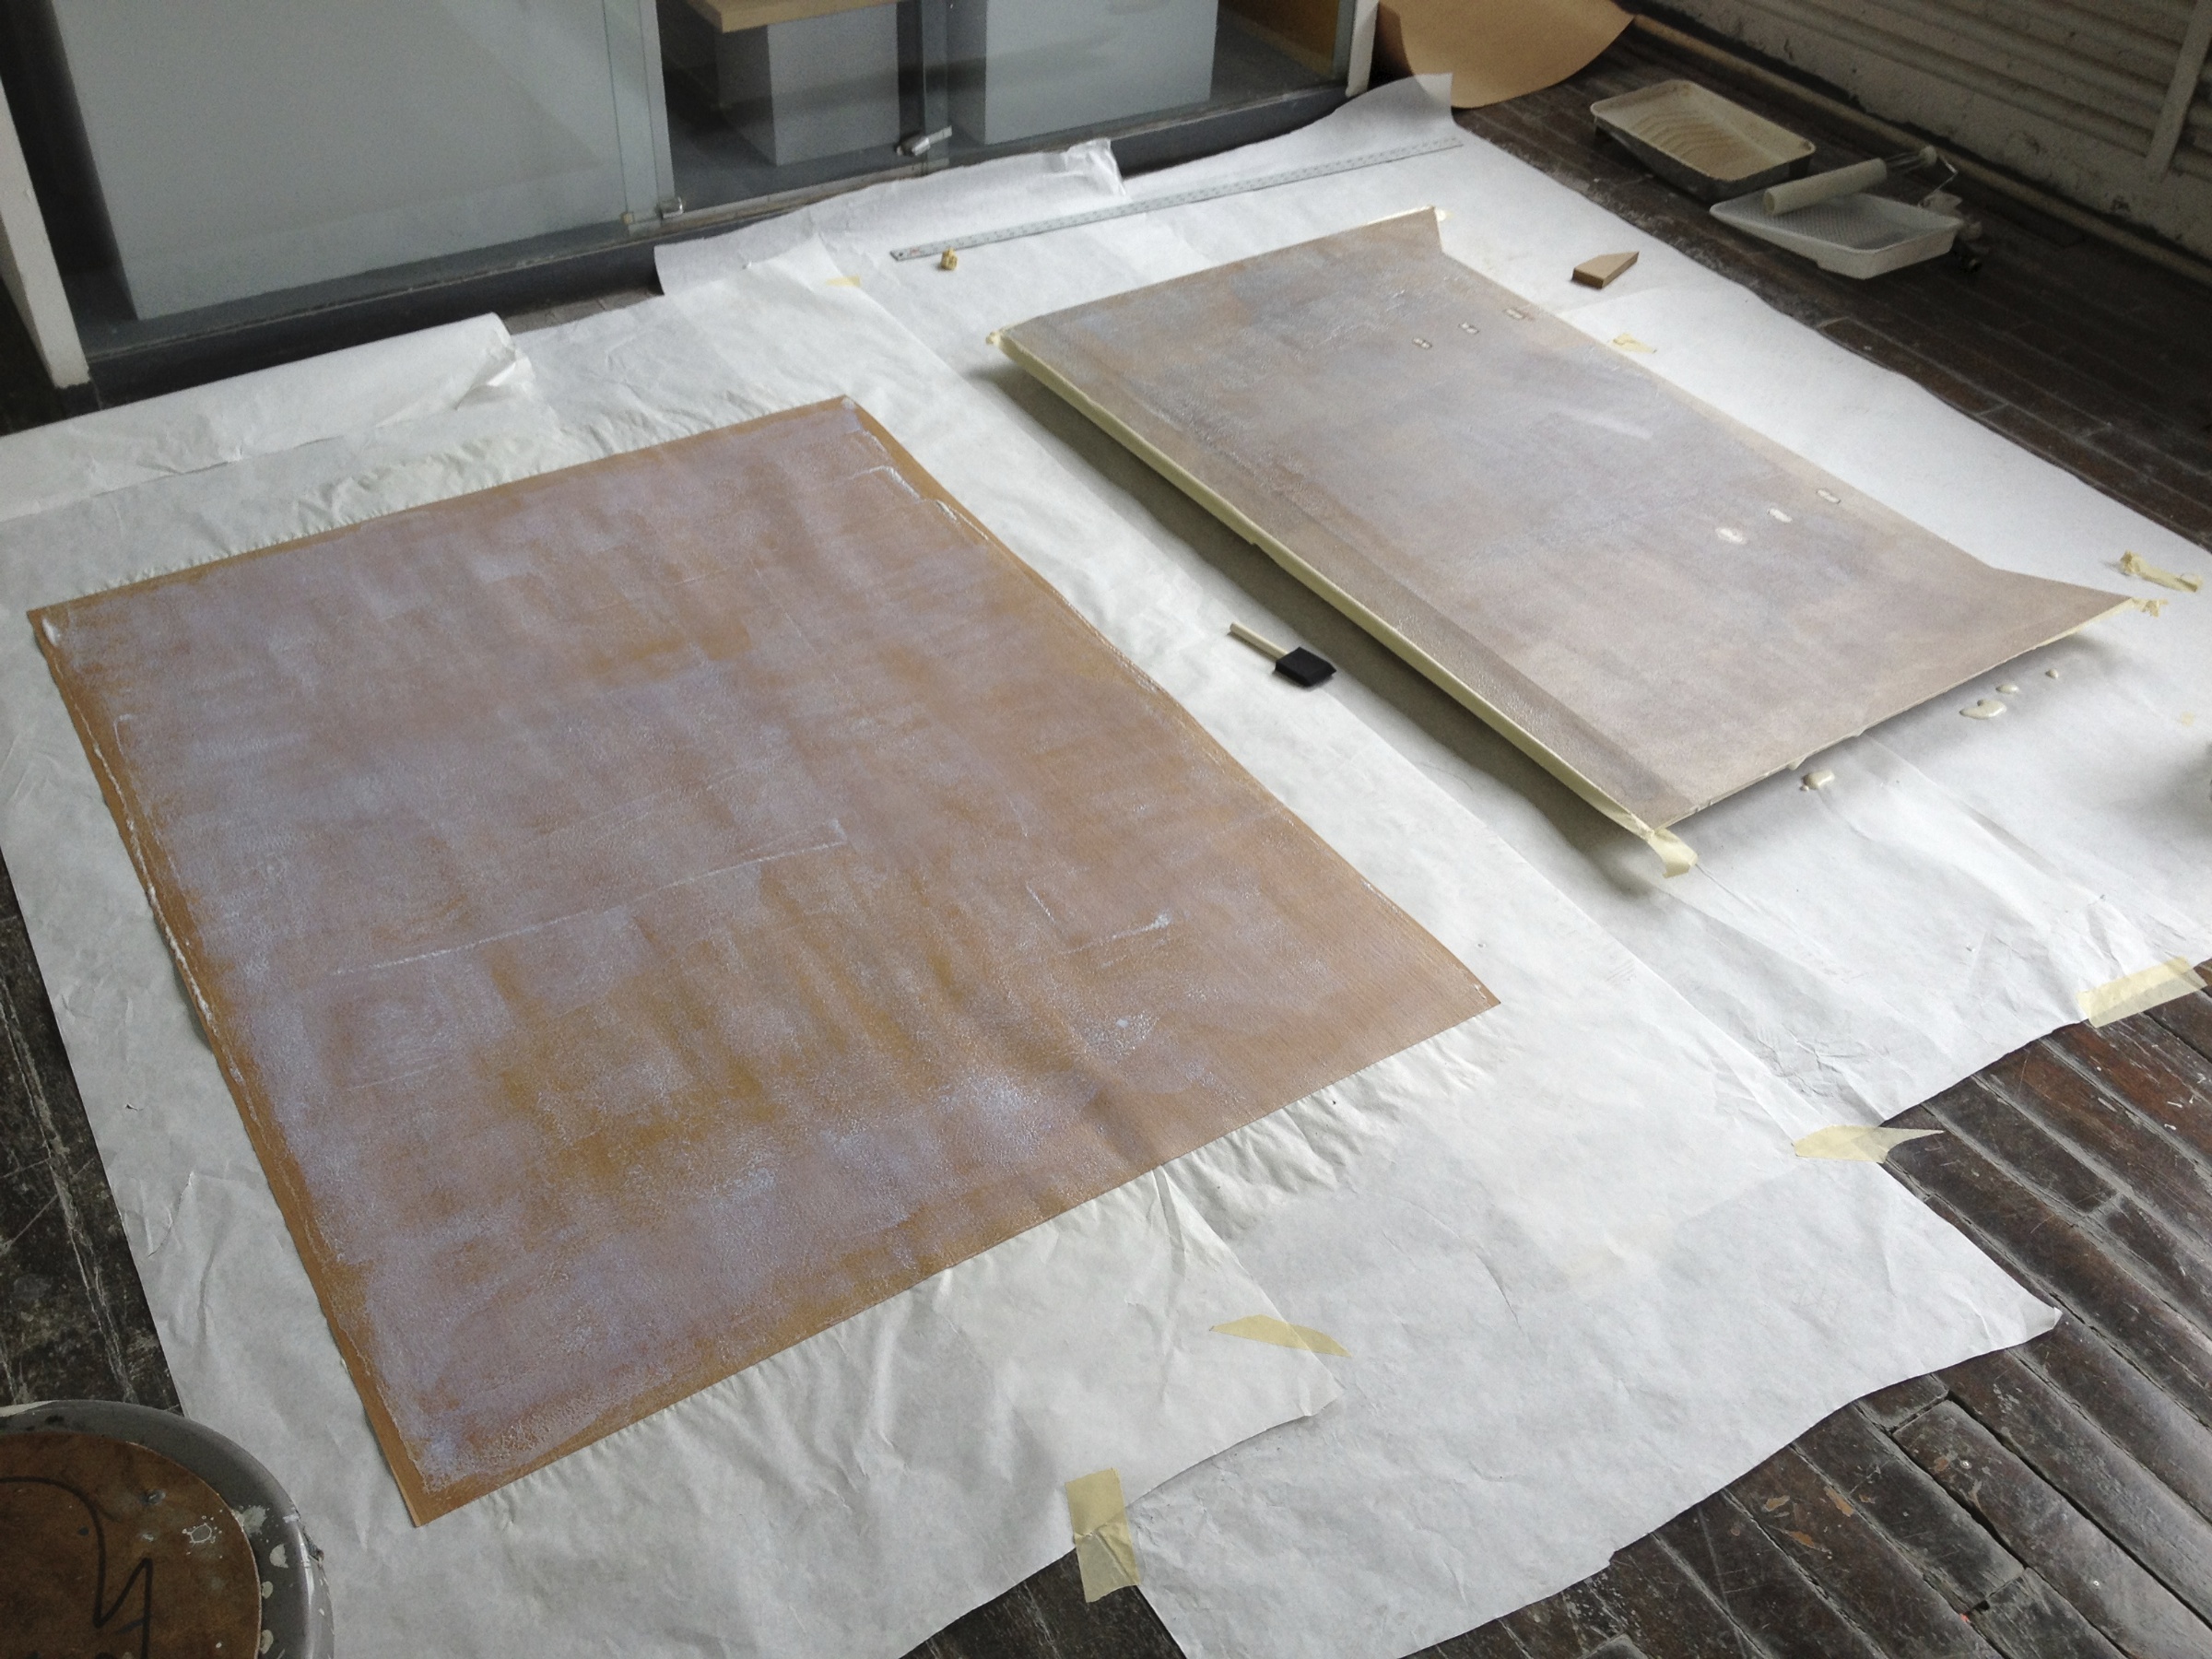  Laminating the table top's MDF core with oak veneer 